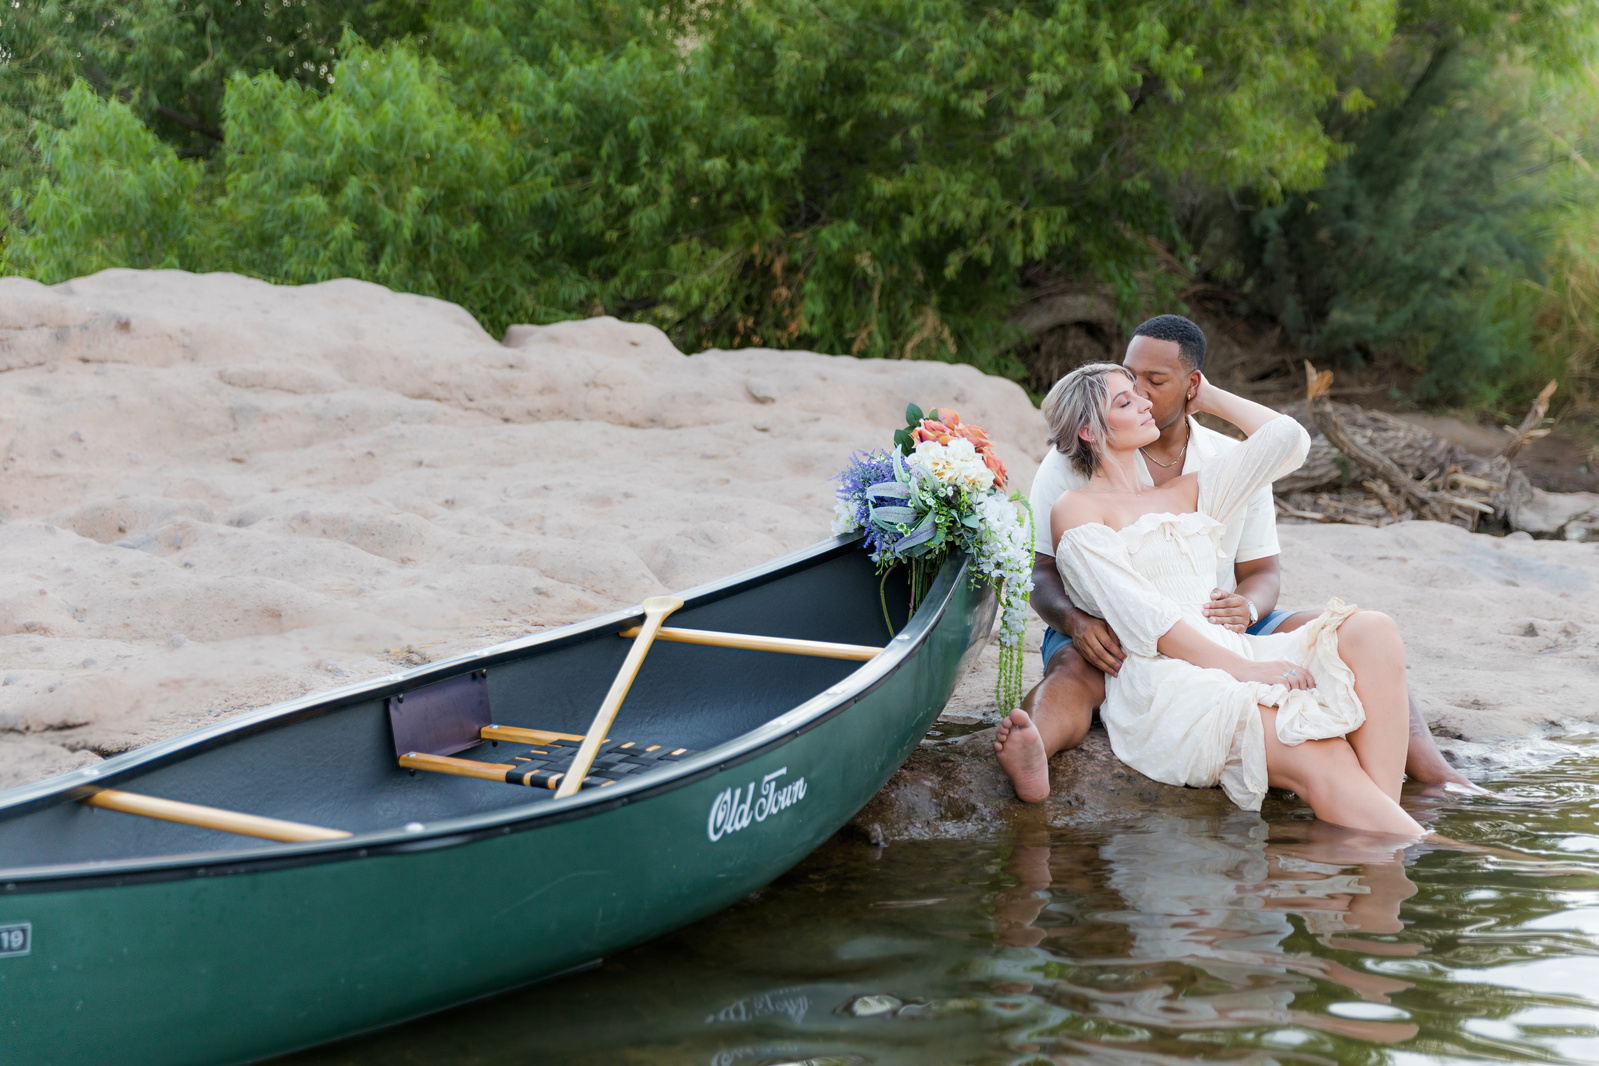 A couple sitting next to a lake by a canoe